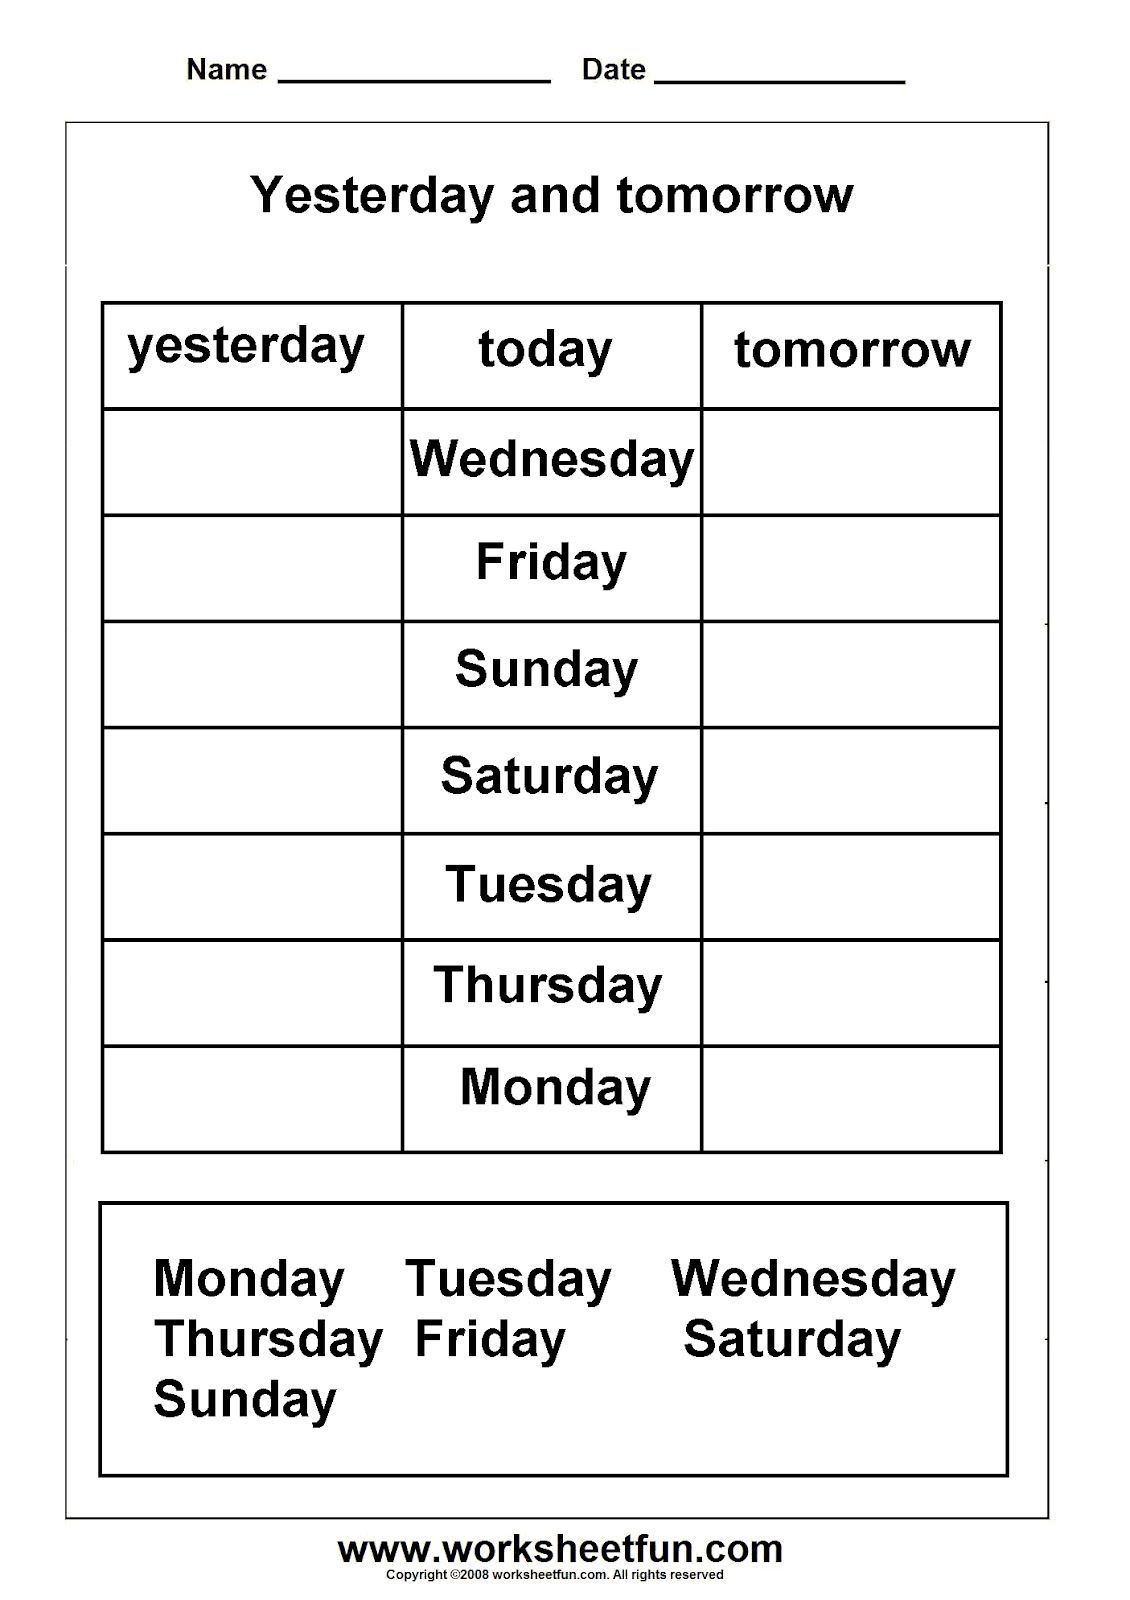 Days Of The Week: Yesterday And Tomorrow Worksheet | School